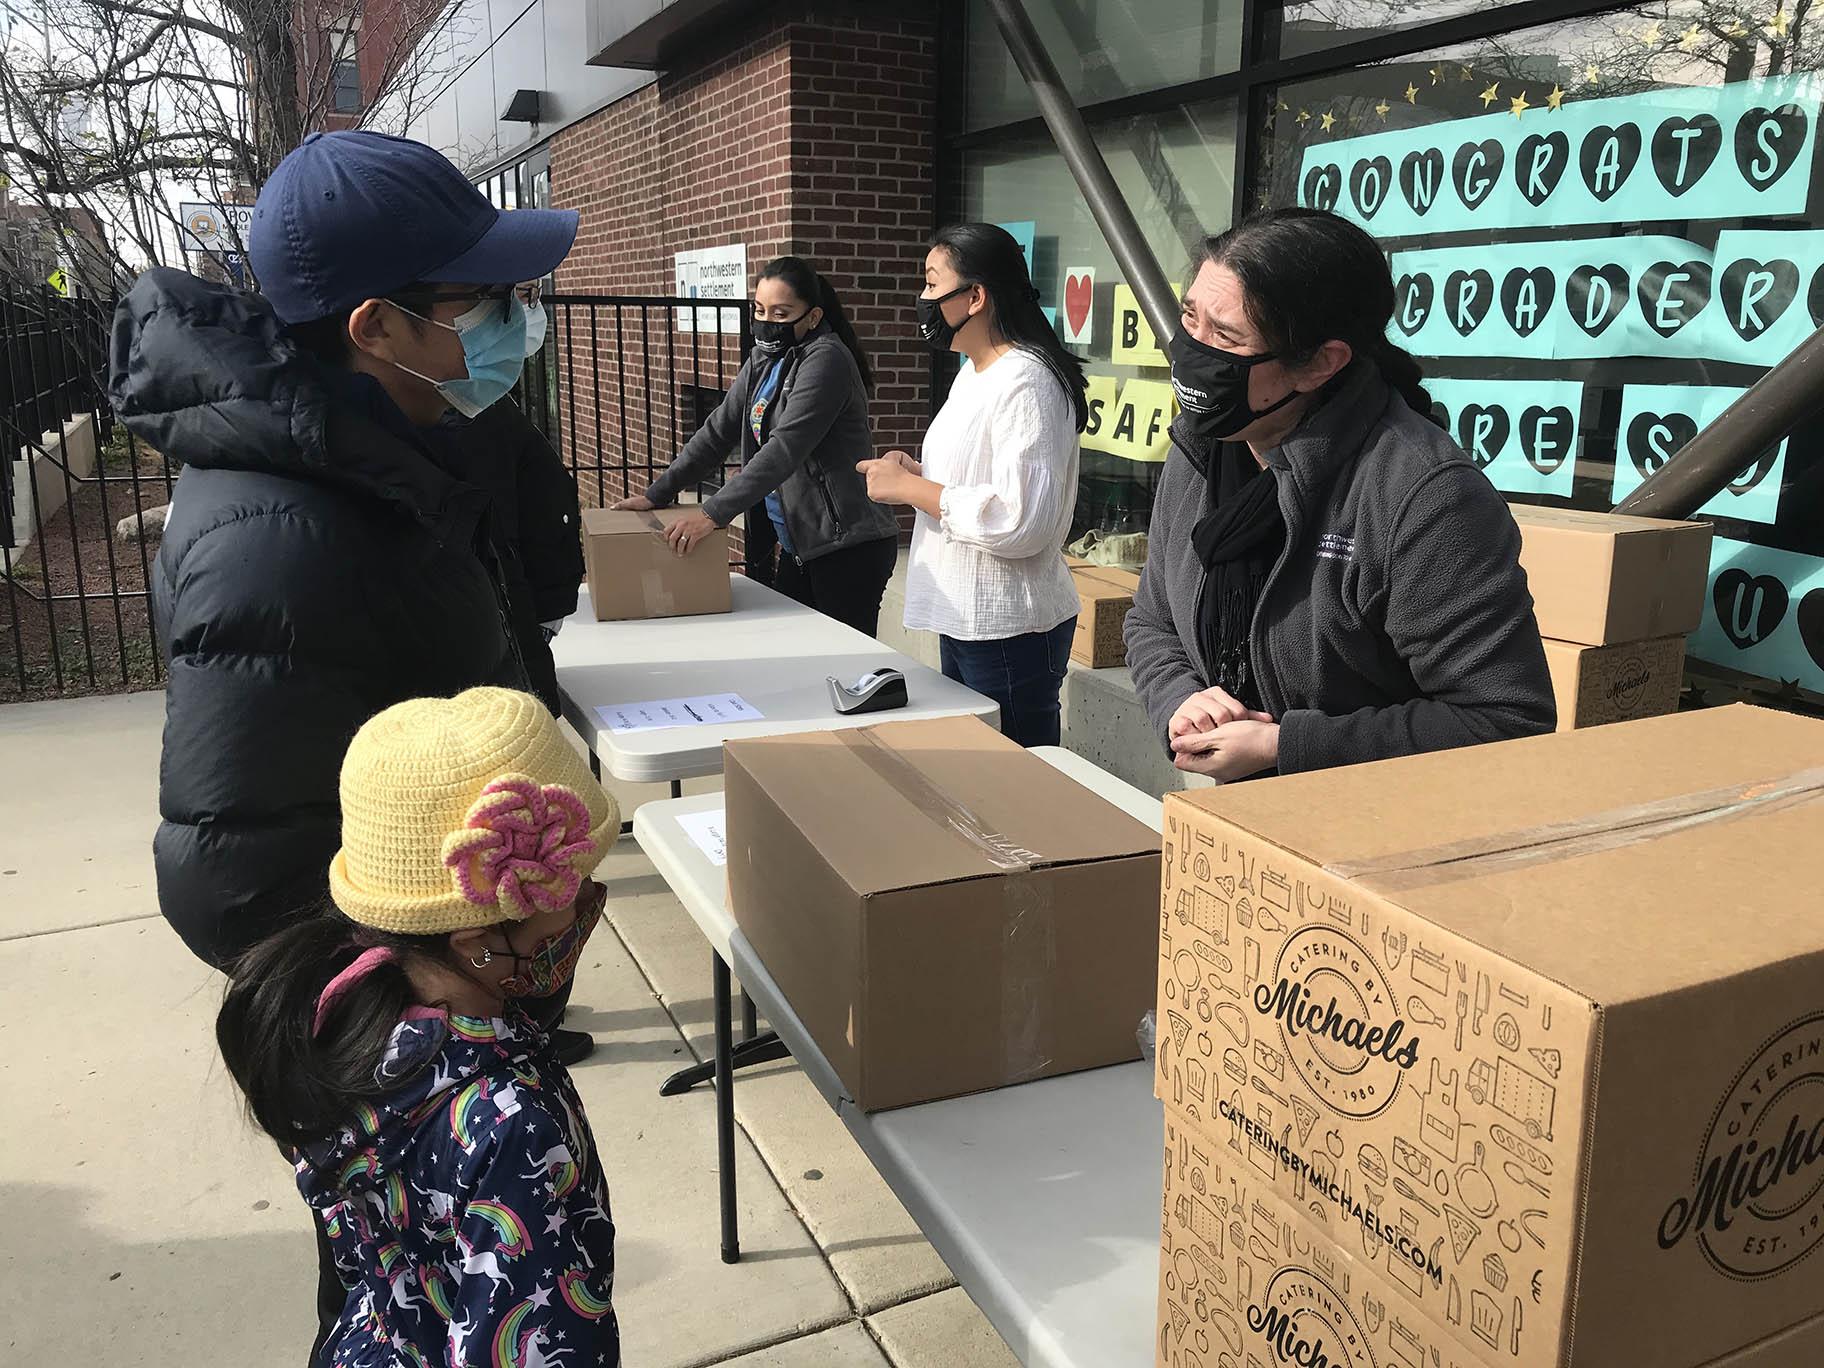 Families pick up Thanksgiving meal boxes and coats for their children at West Town nonprofit Northwestern Settlement on Saturday, Nov. 21, 2020. (Ariel Parrella-Aureli / WTTW News)